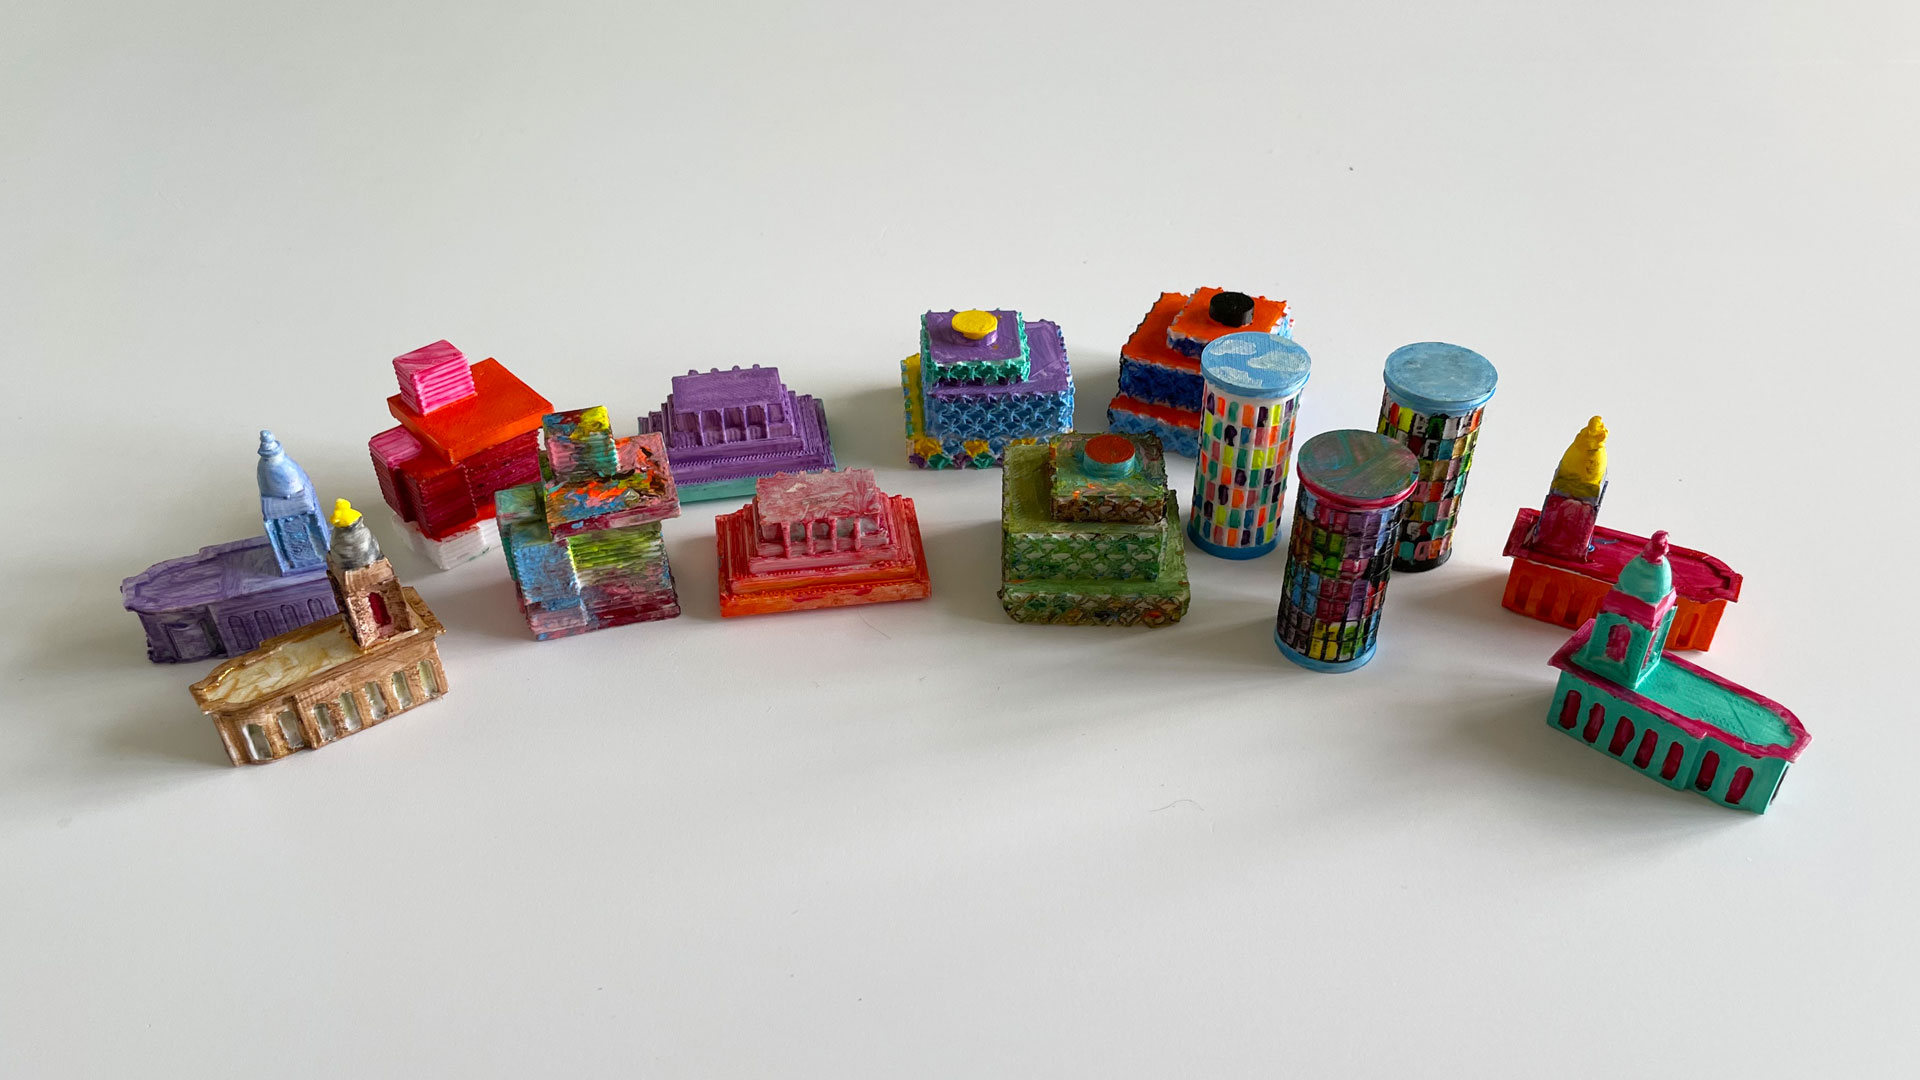 14 3D printed miniature iconic buildings of Birmingham all painted in different colours